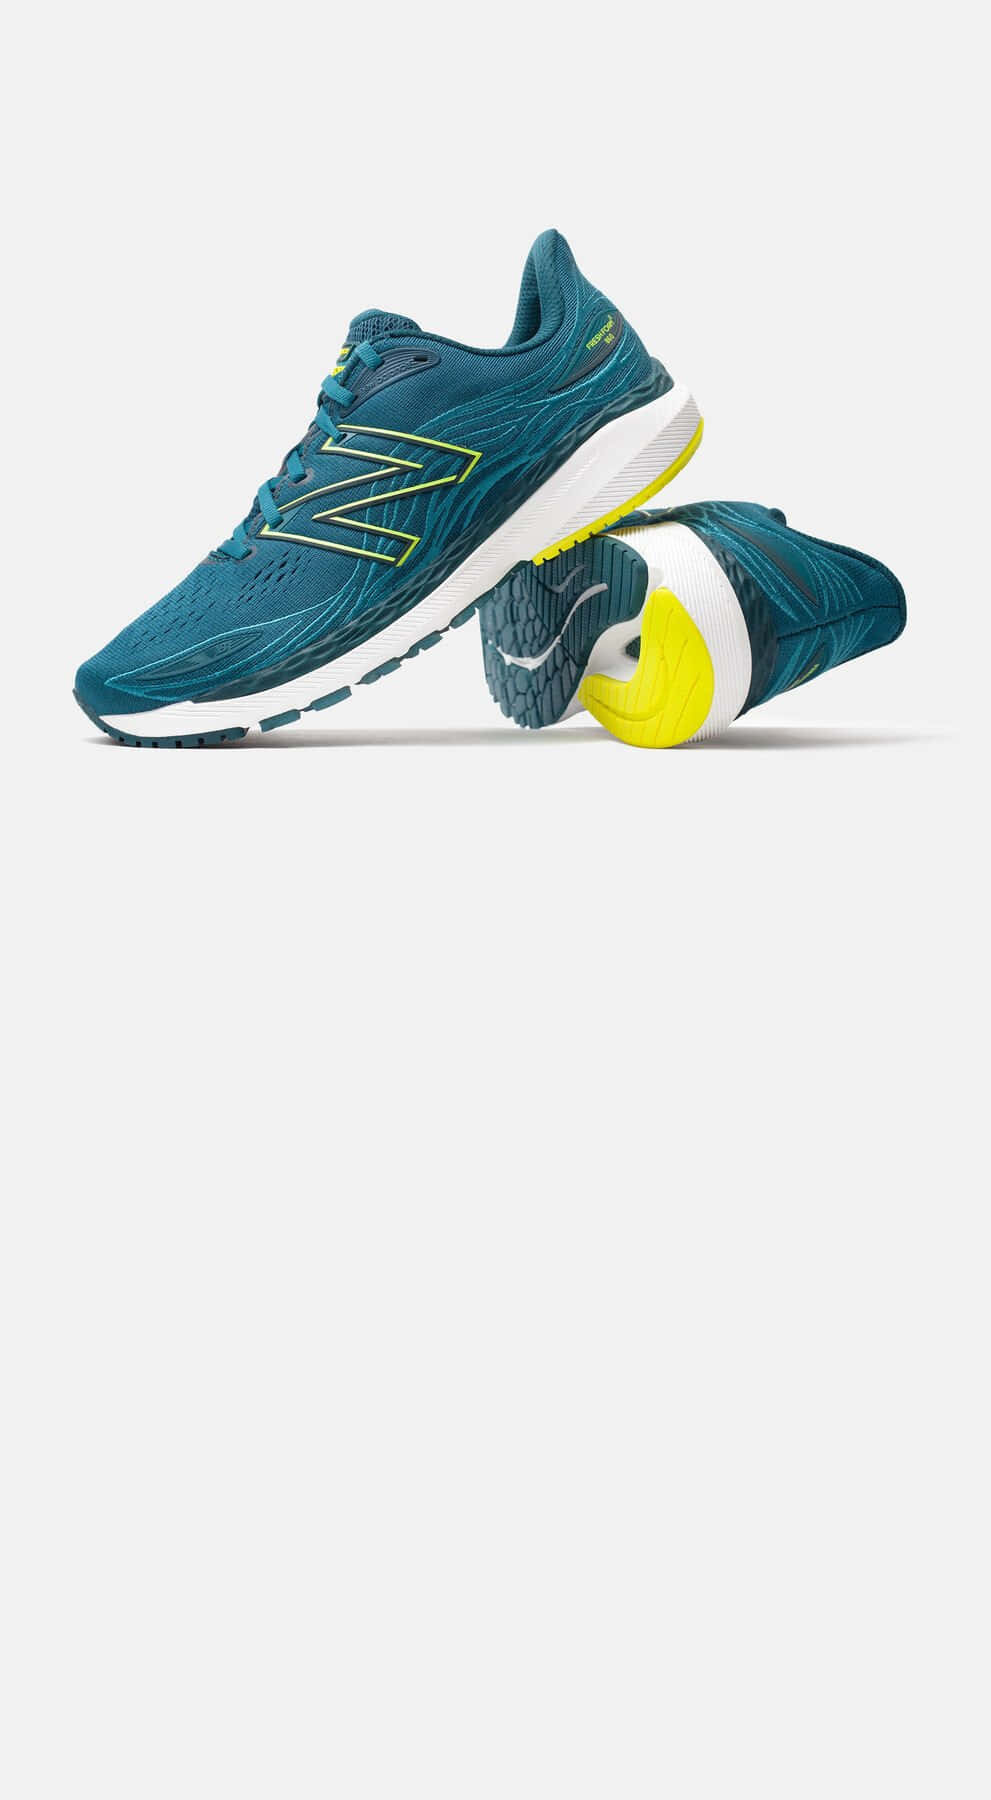 "Look good, feel good. Step up your style with the iconic New Balance shoes."